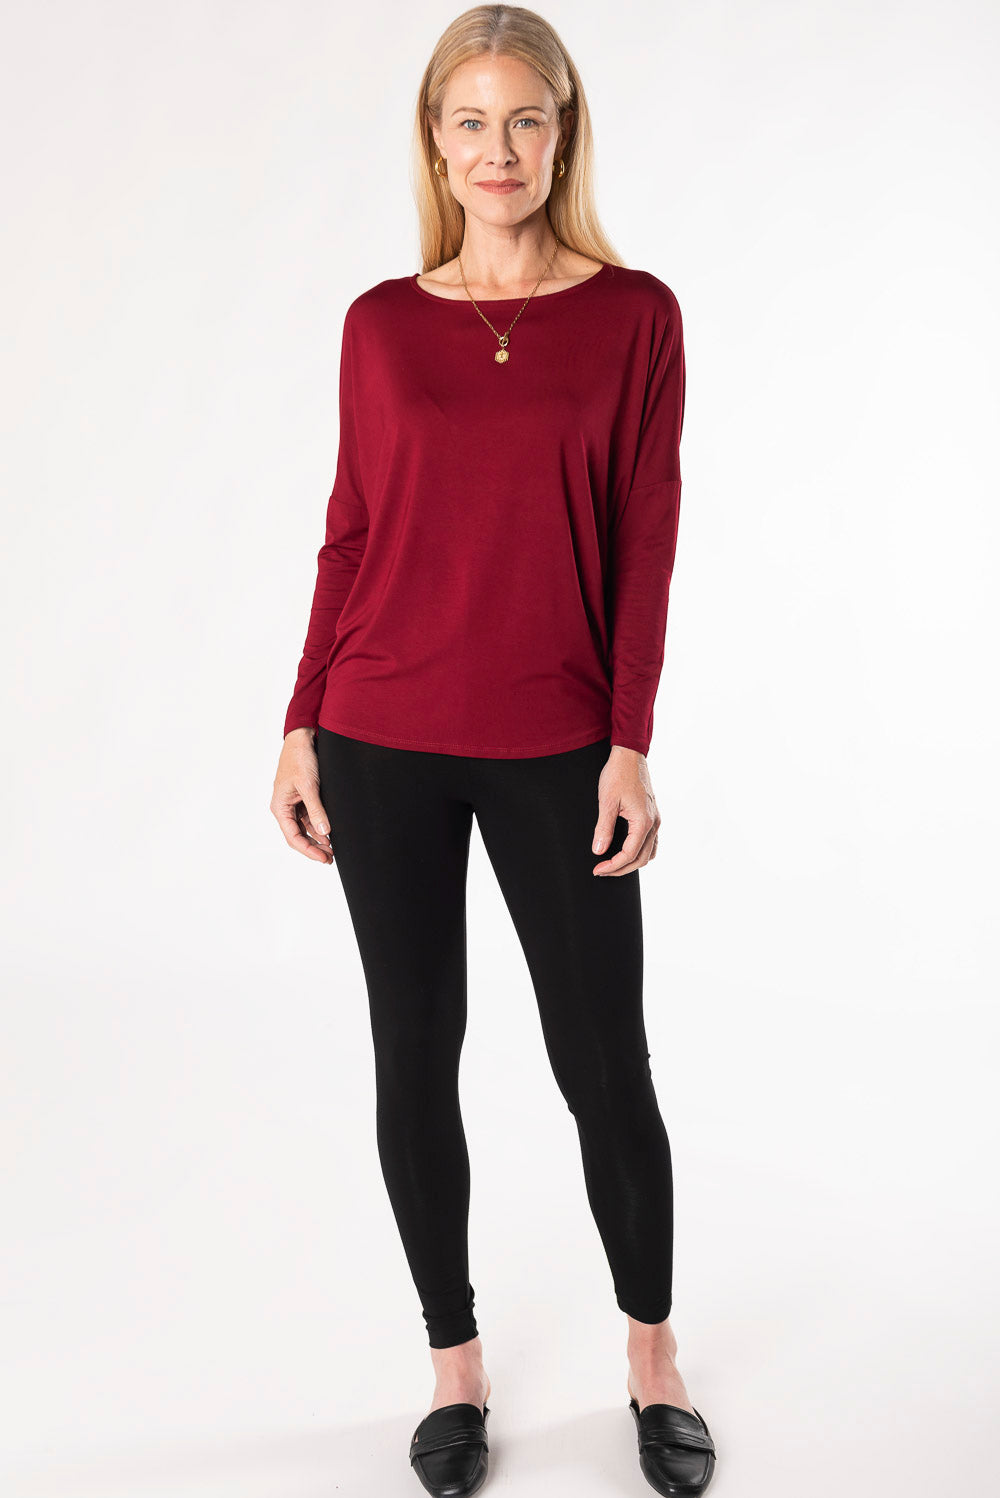 Bamboo batwing long sleeve boat neck top - red